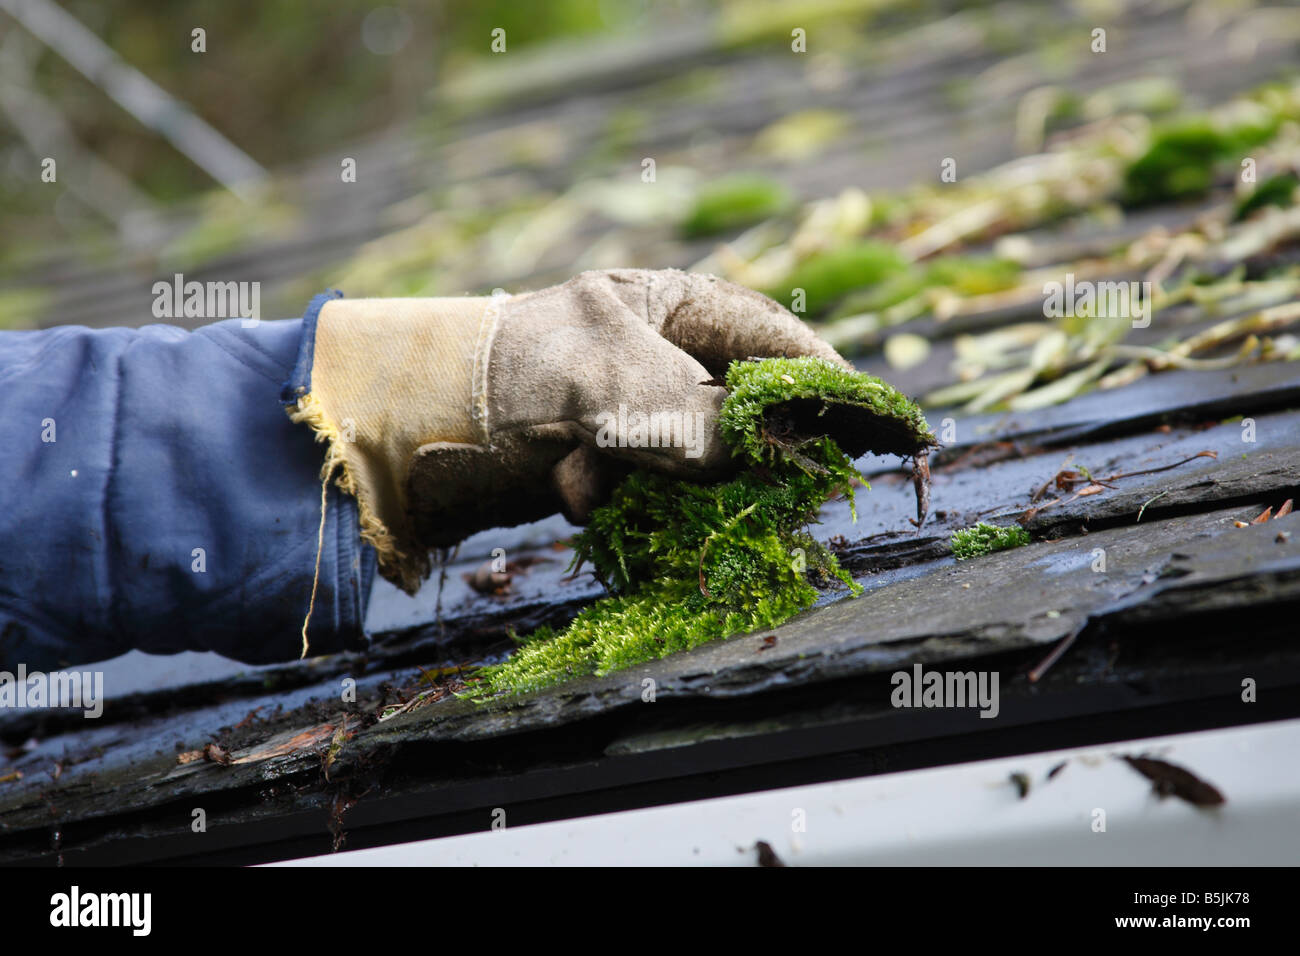 REMOVING MOSS FROM SLATE ROOF Stock Photo